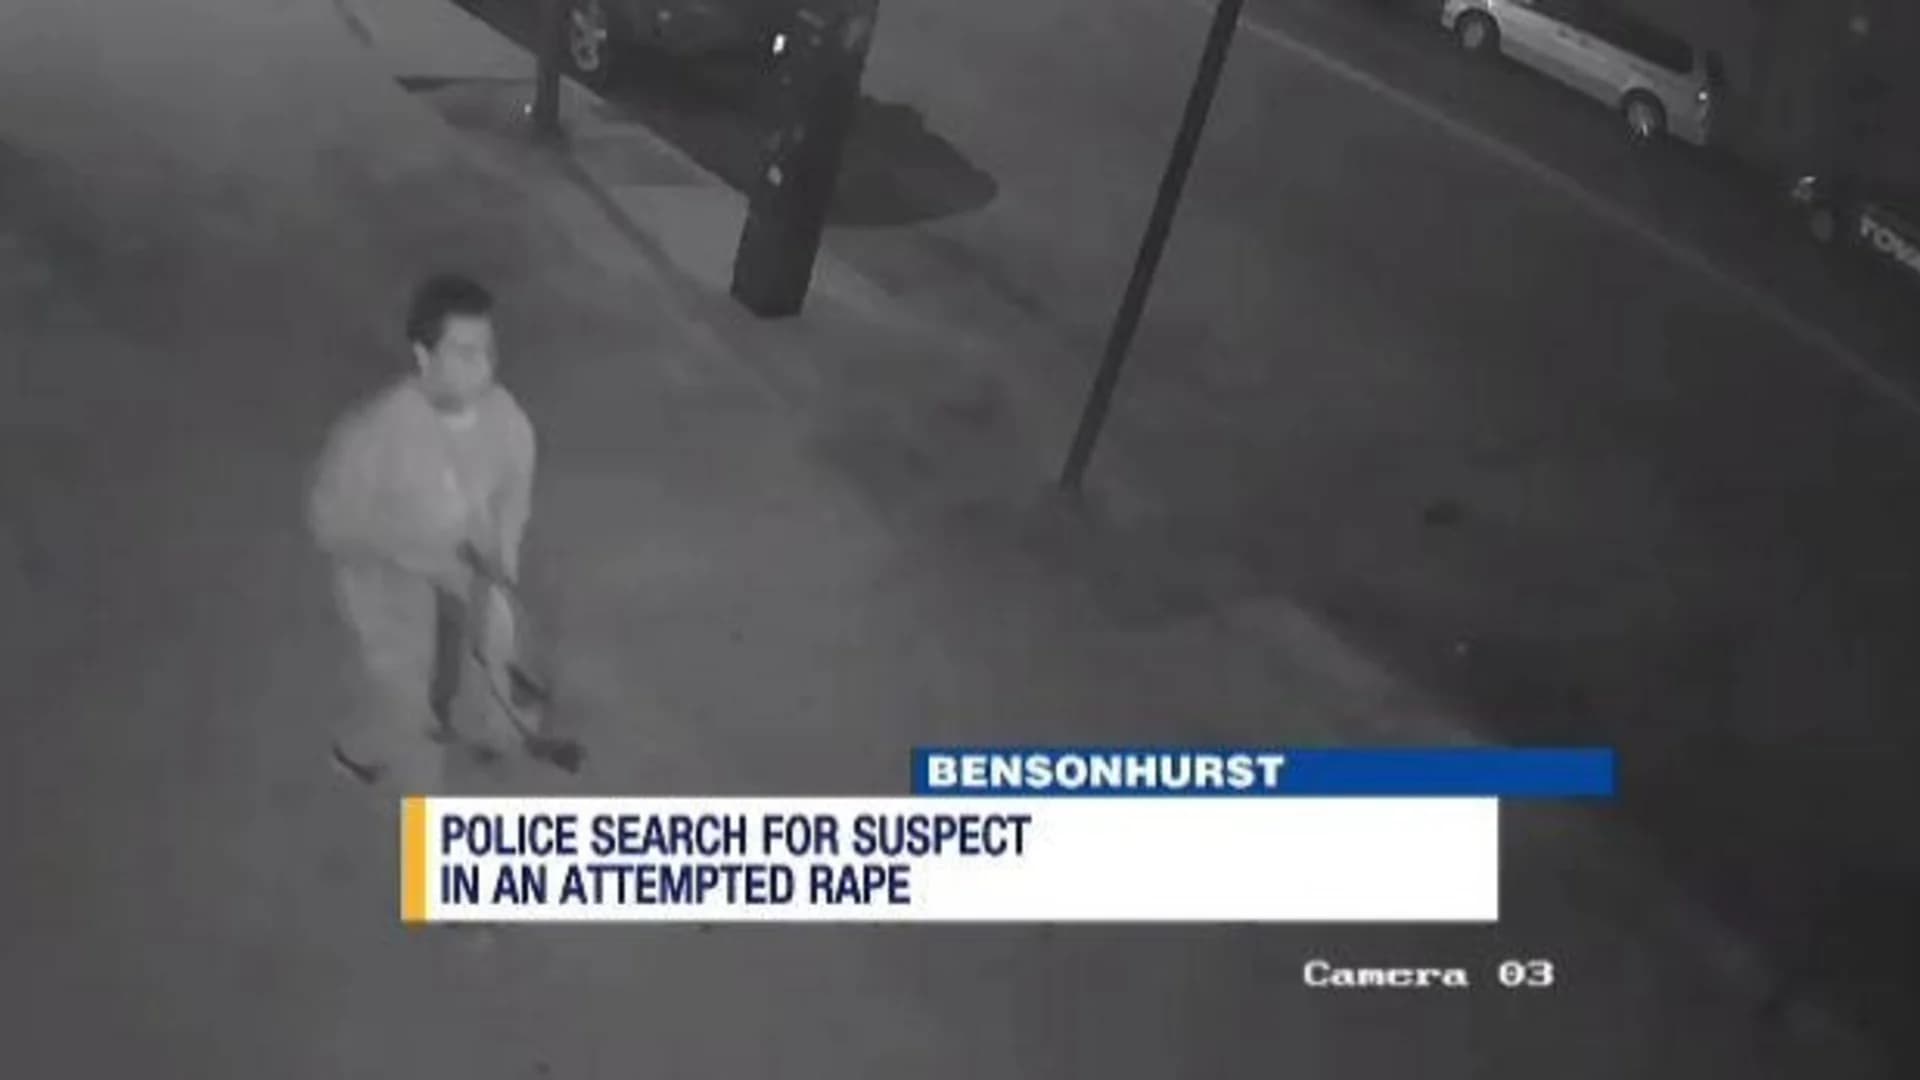 Police: Suspect attempted to rape woman in Brooklyn